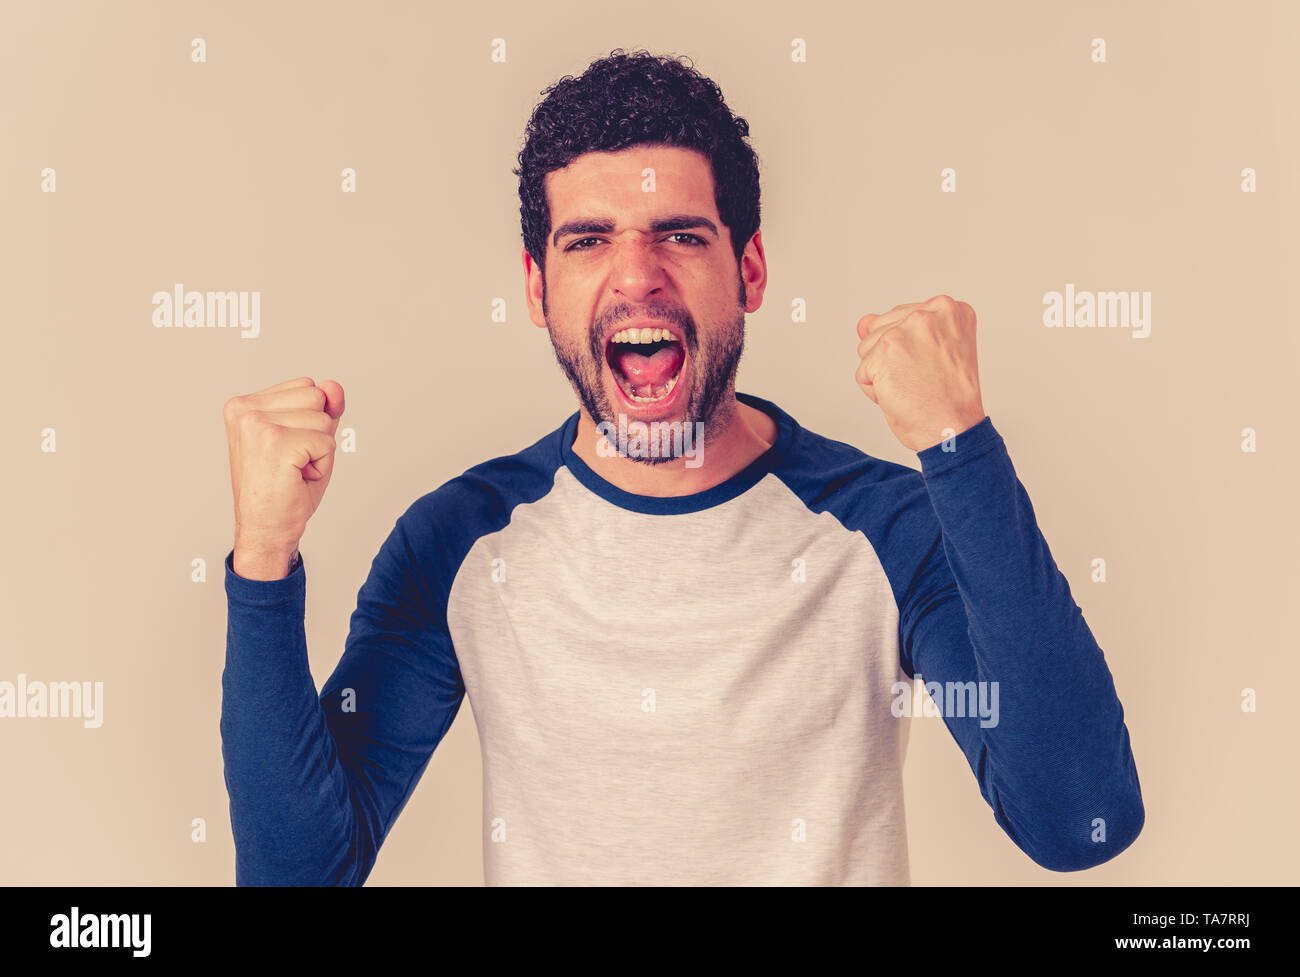 Portrait of young happy and excited man winning the lottery celebrating goal or having great success with proud face. In People success and Facial Exp Stock Photo